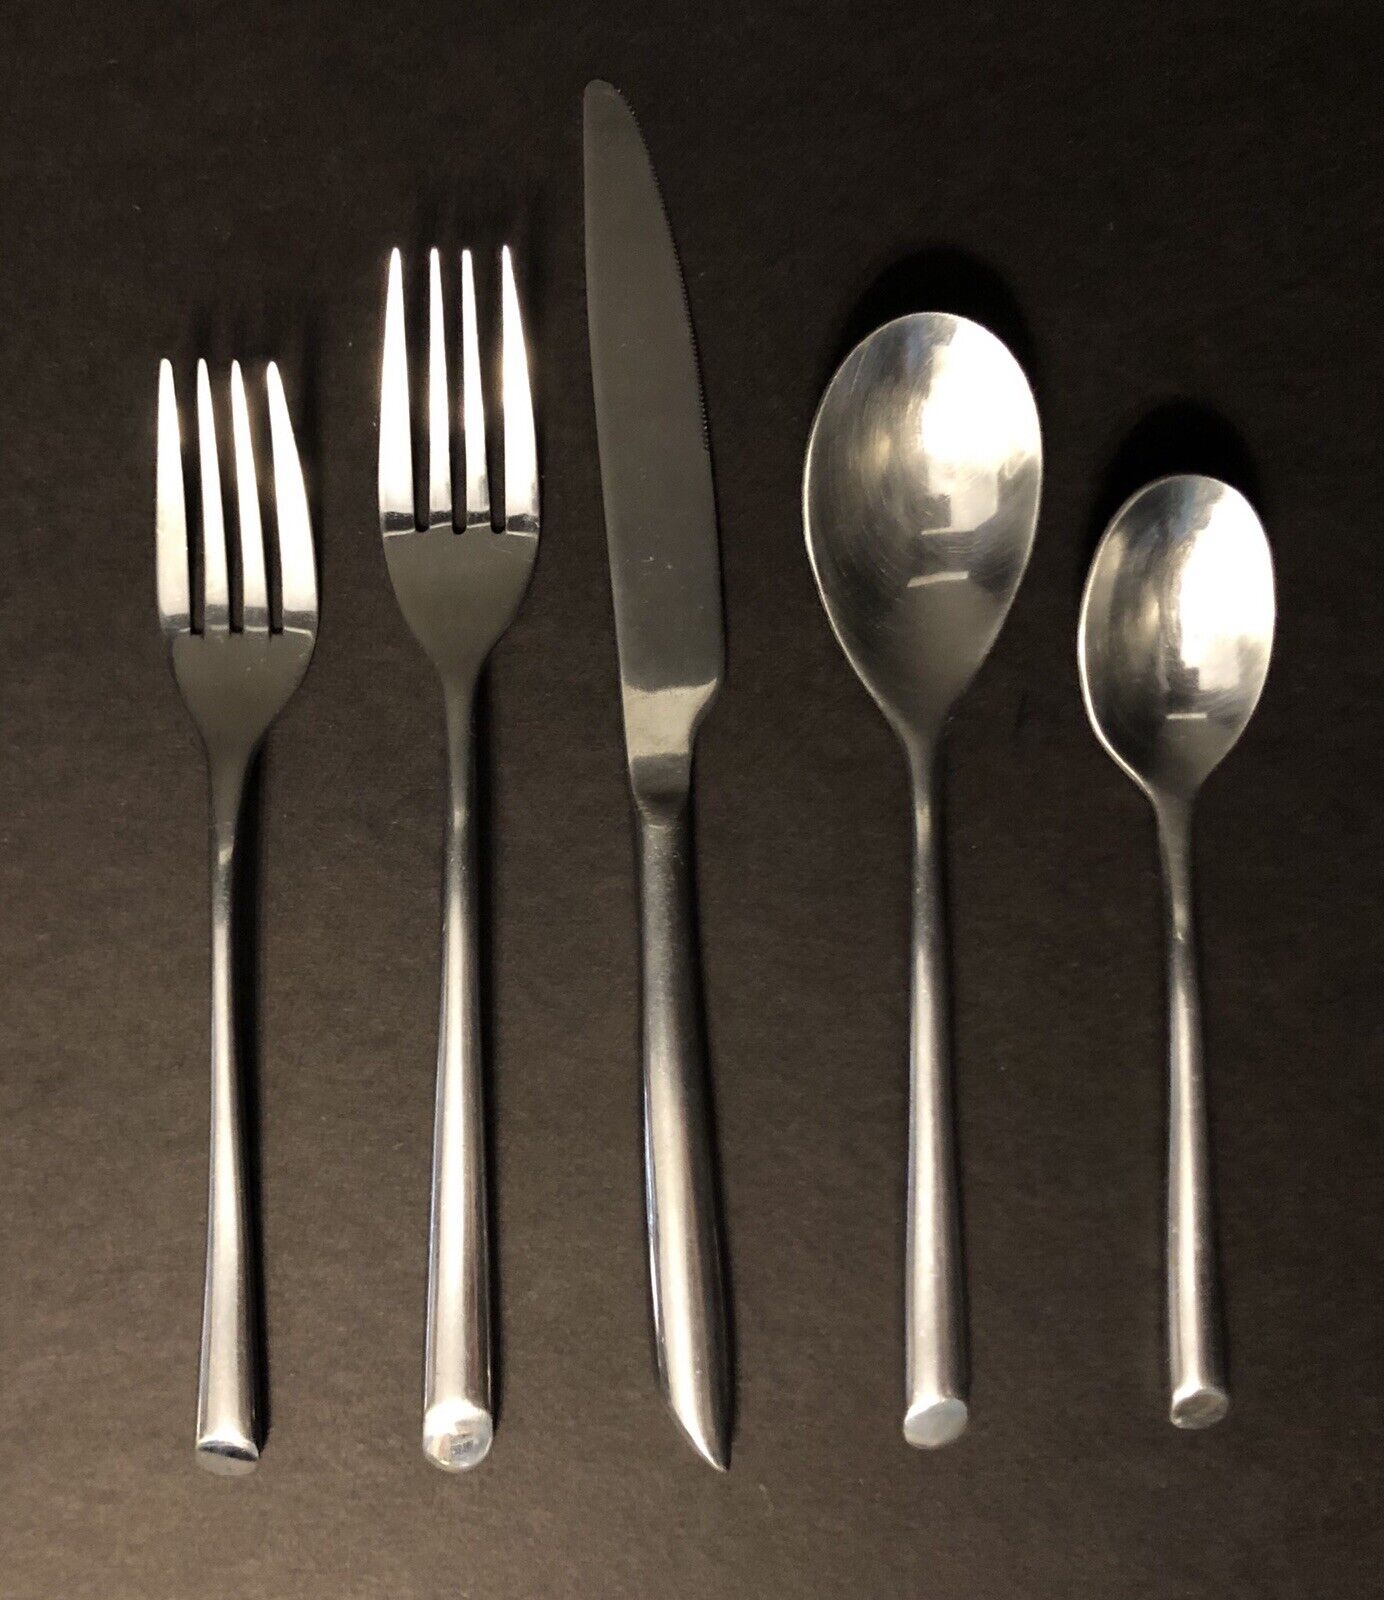 TOWLE STAINLESS FLATWARE 5 Piece Place Setting - WAVE Pattern